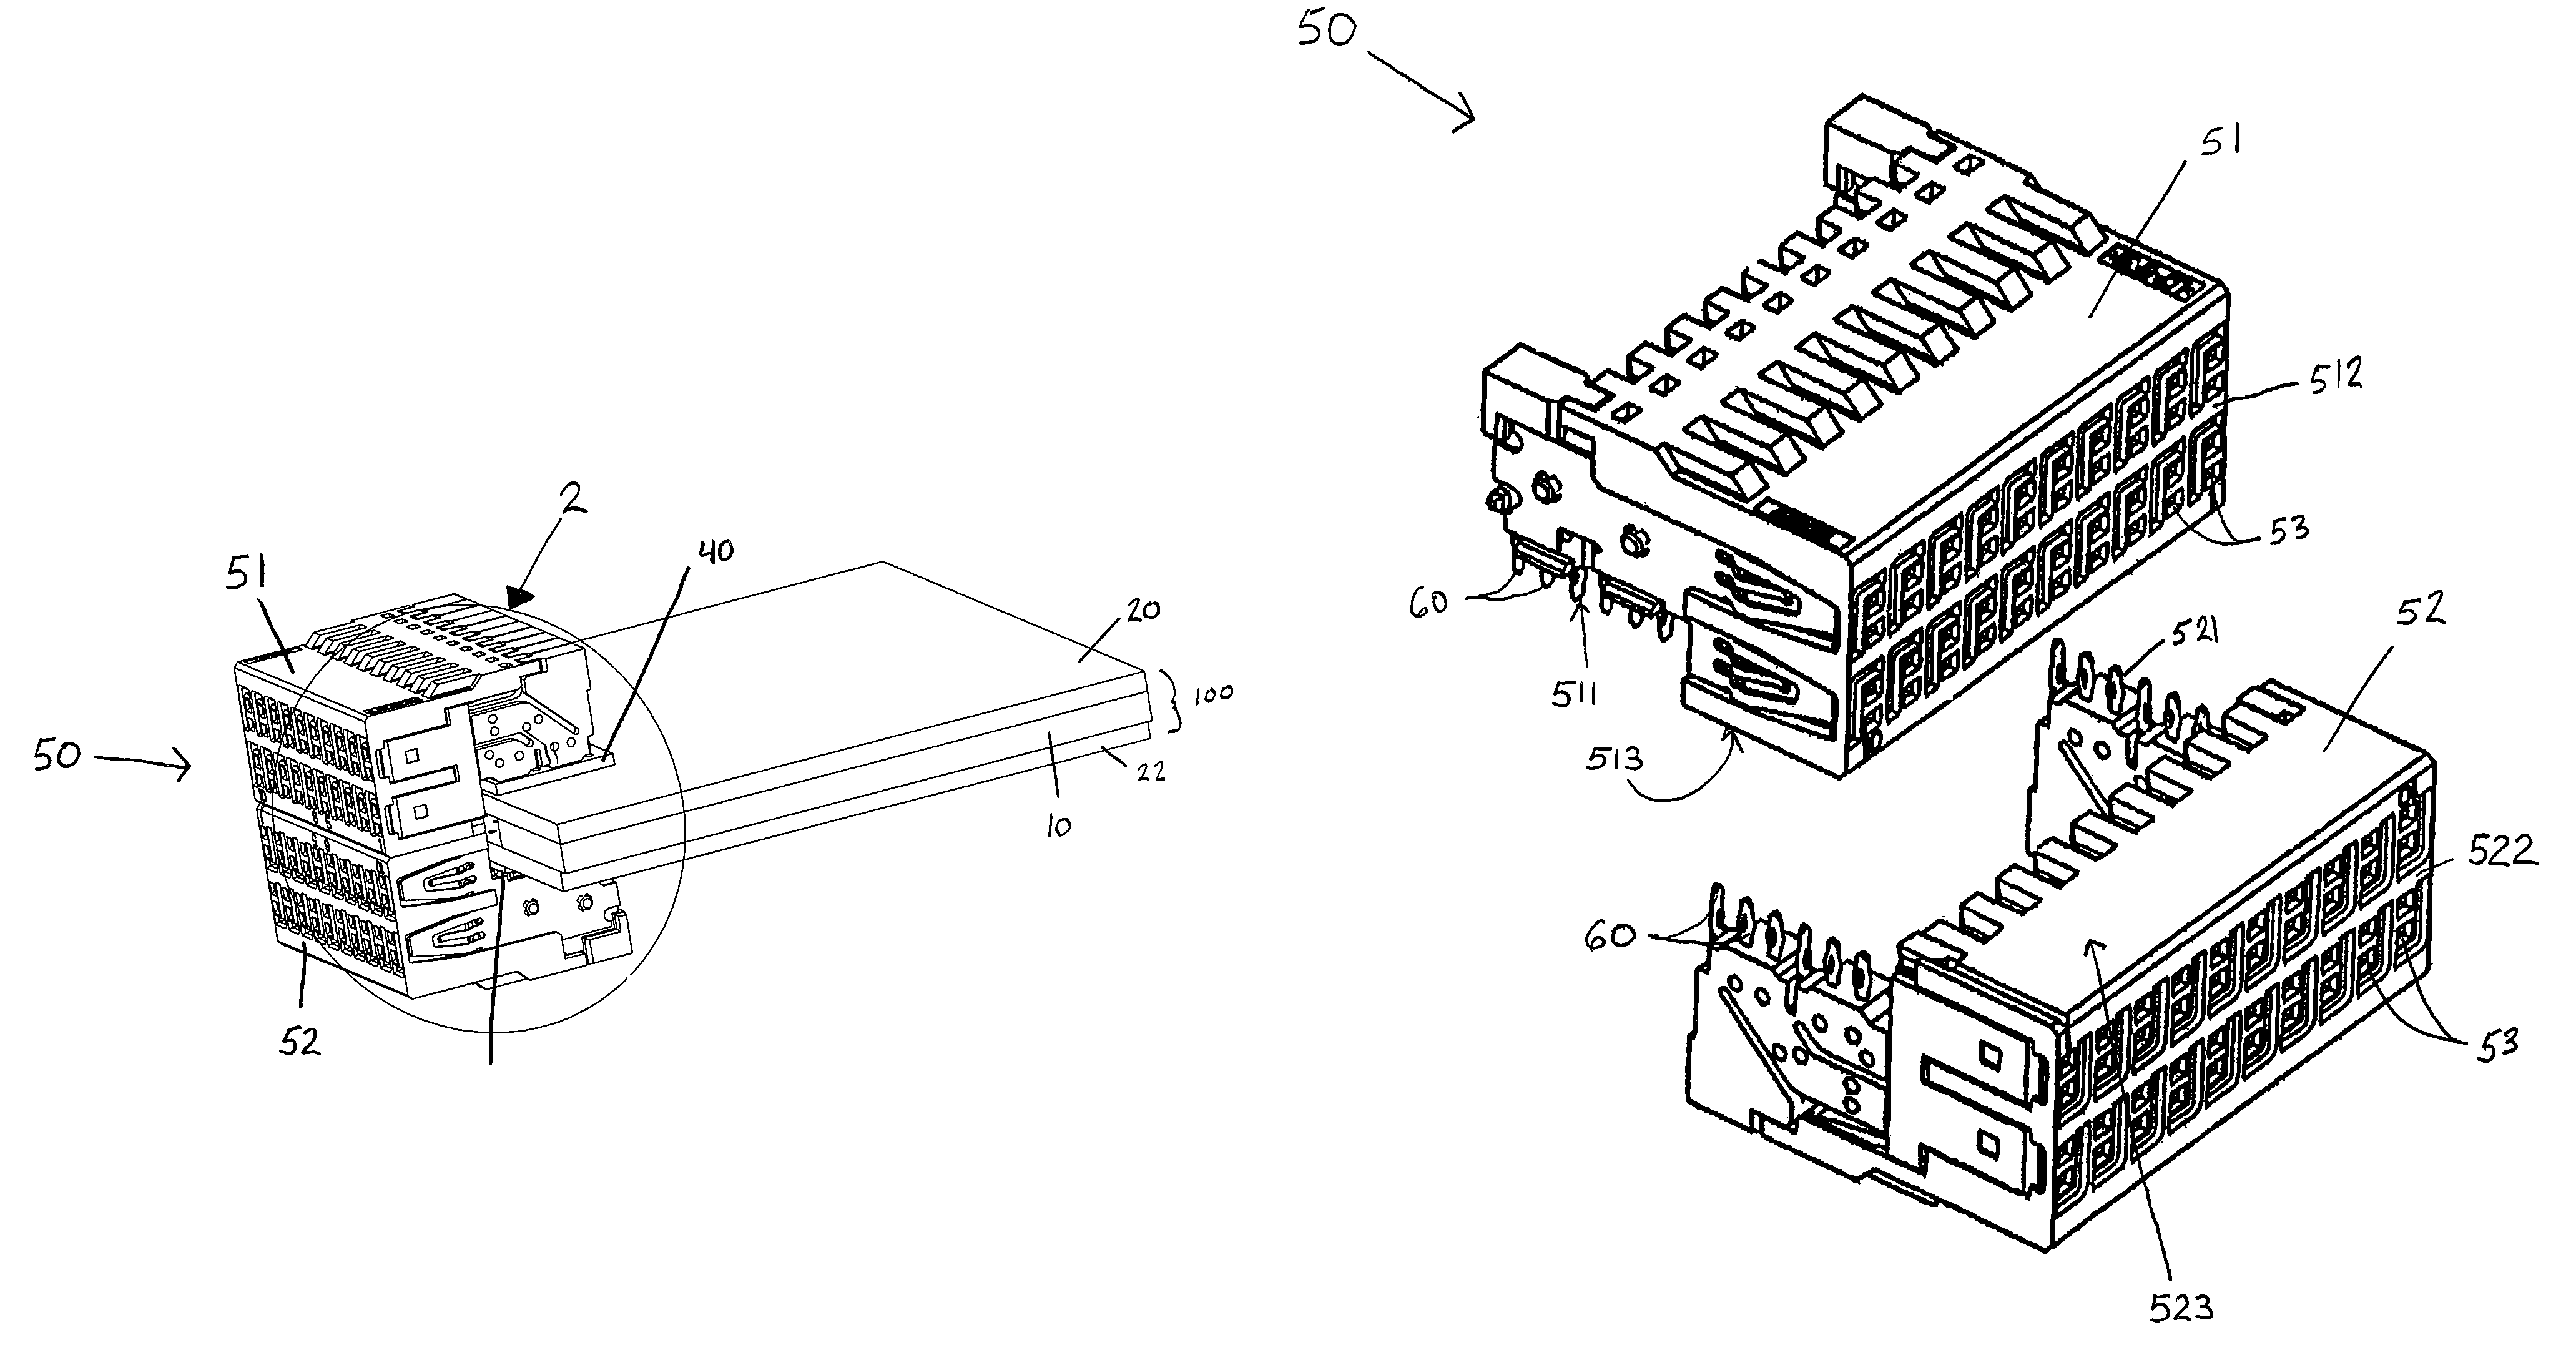 Straddle mount connector